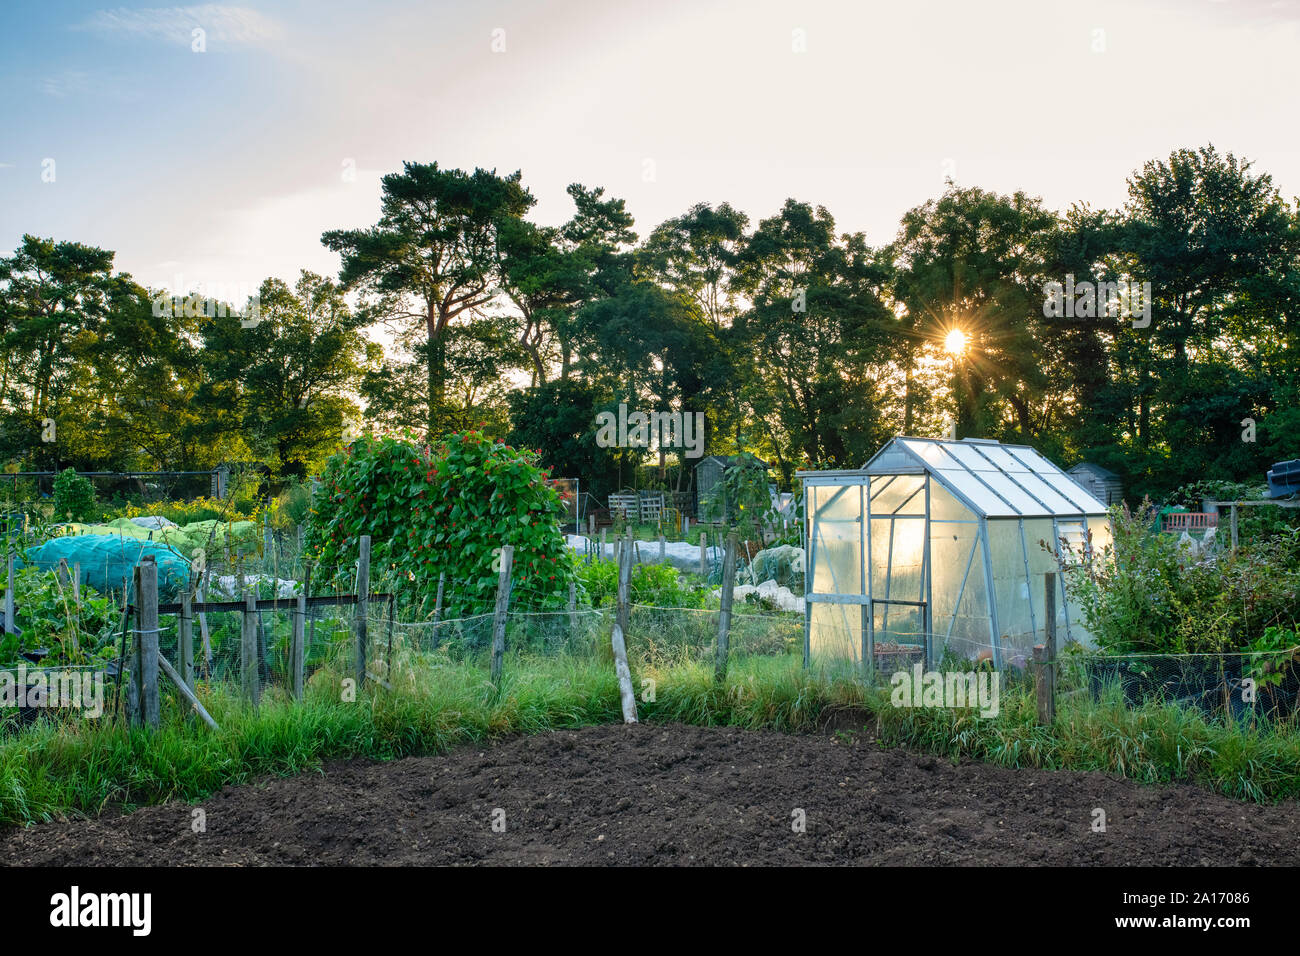 Allotments in the cotswold village of Bourton on the water, Cotswolds, Gloucestershire, England Stock Photo